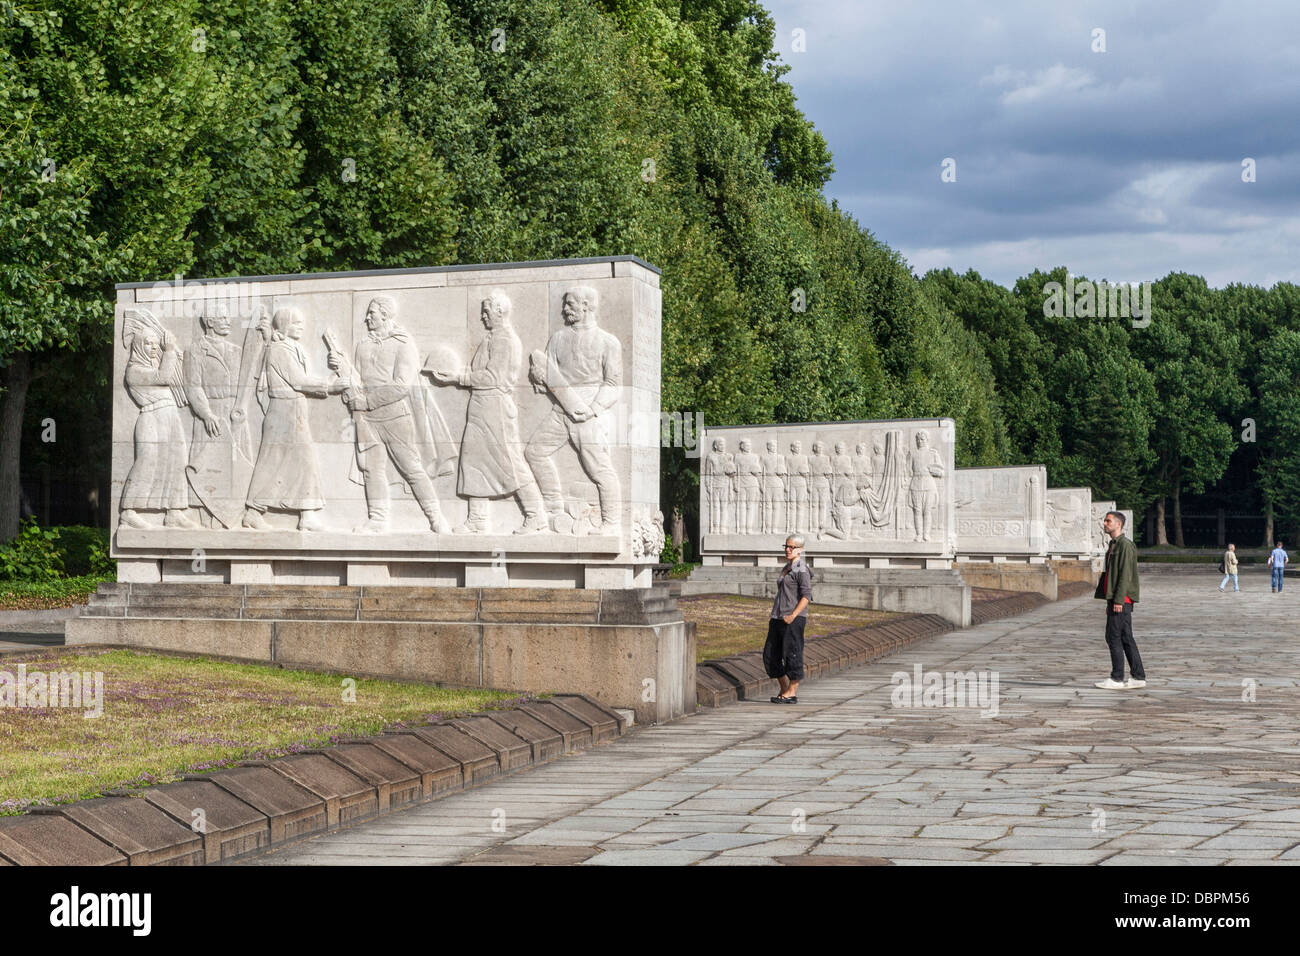 Sarcophagi bearing military scenes at the Soviet War memorial for 5000 soldiers who died in WW2 - Treptow, Berlin Stock Photo